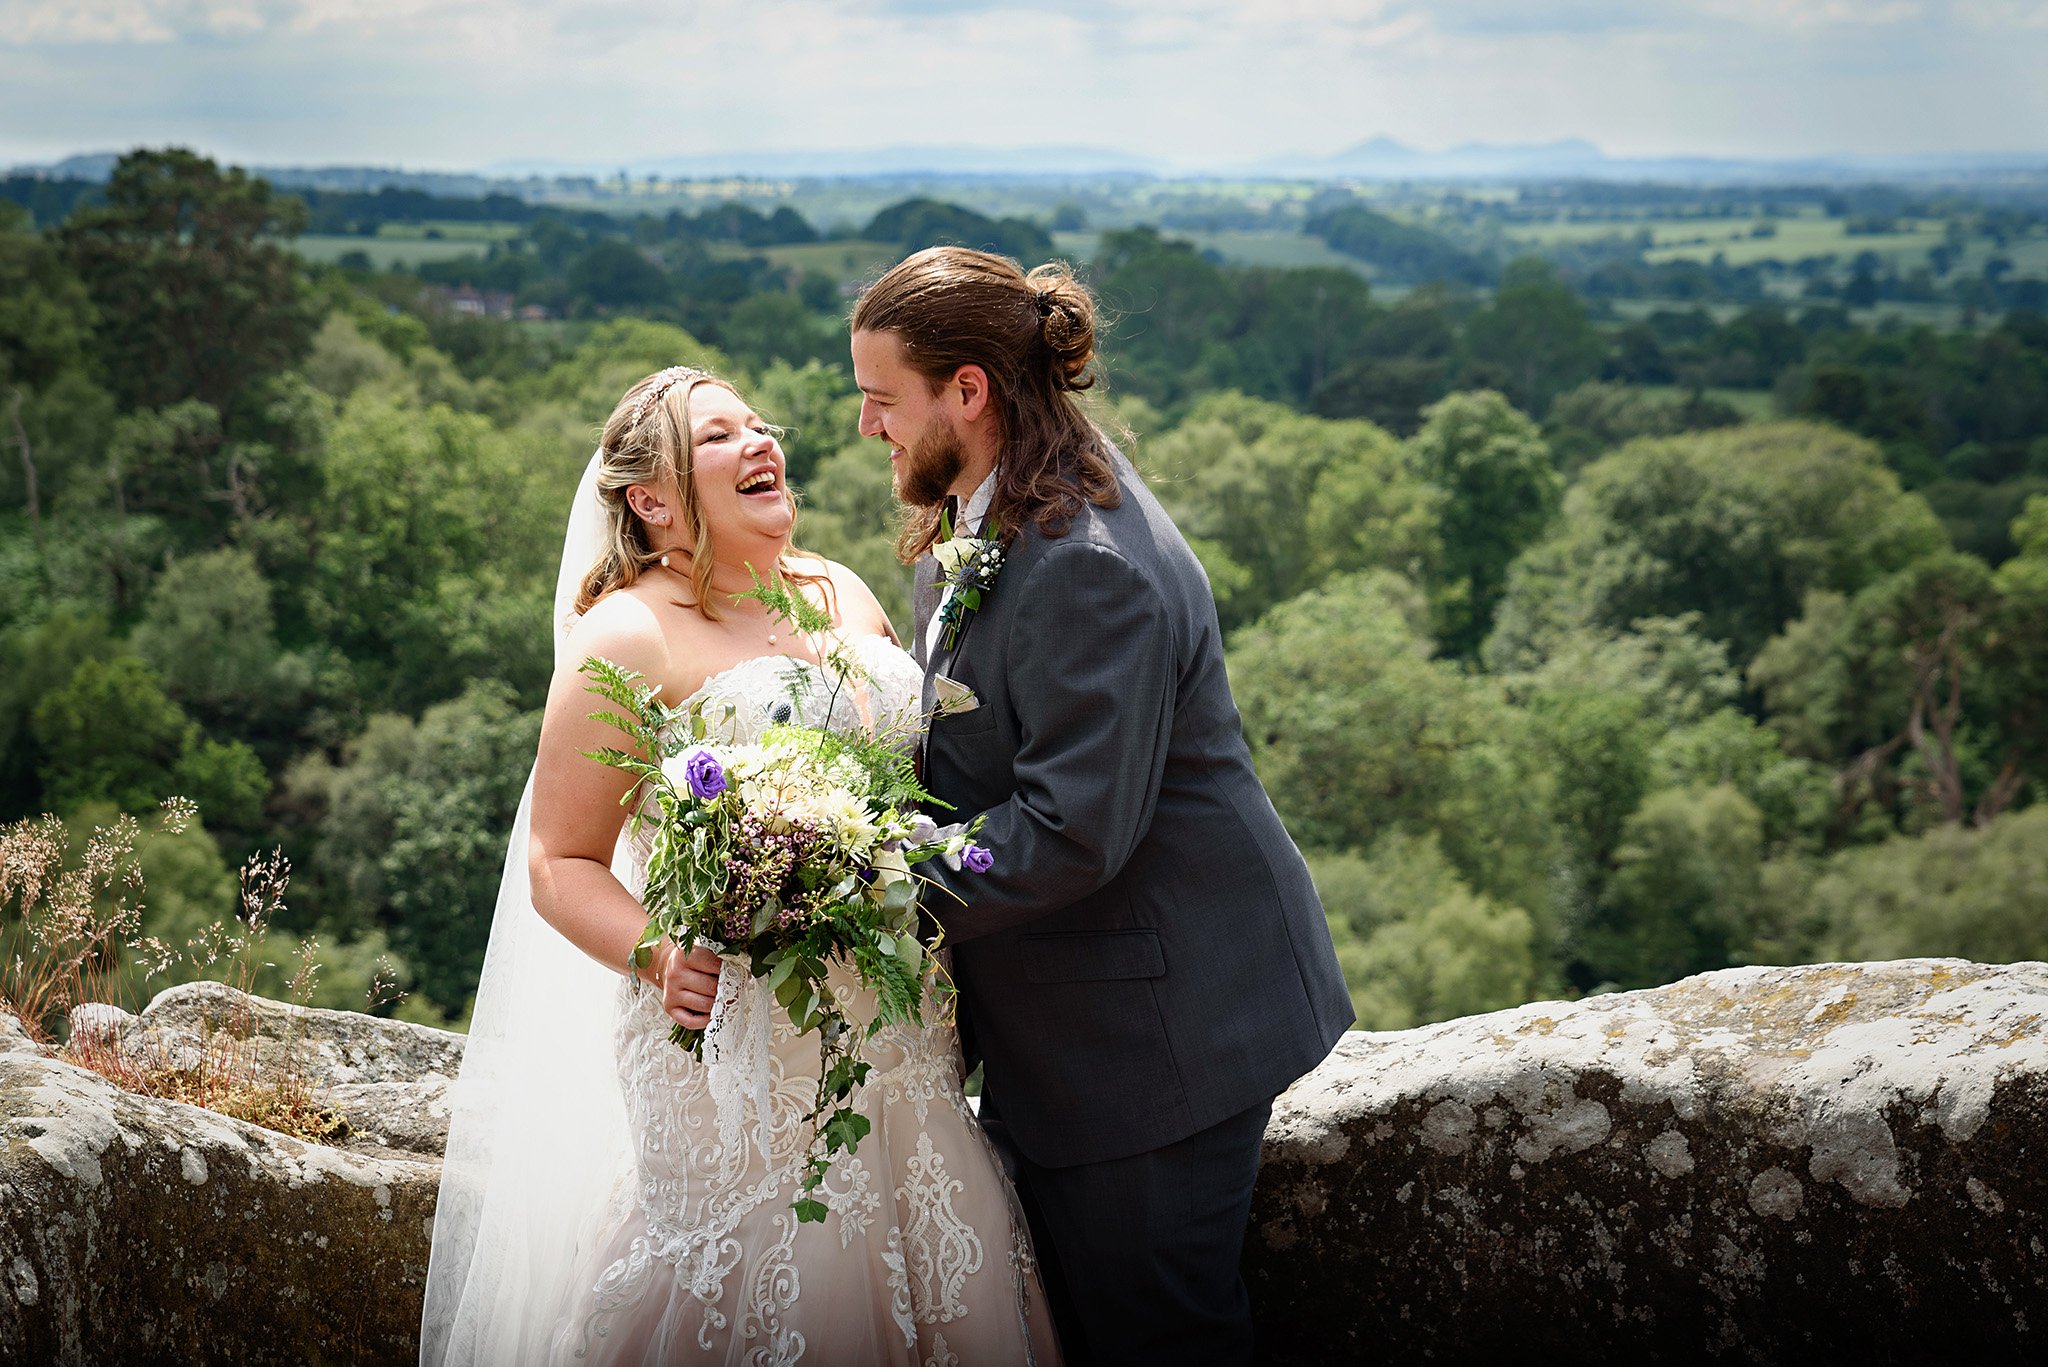  Bride and groom laughing in a wedding photo at Hawkstone Park 